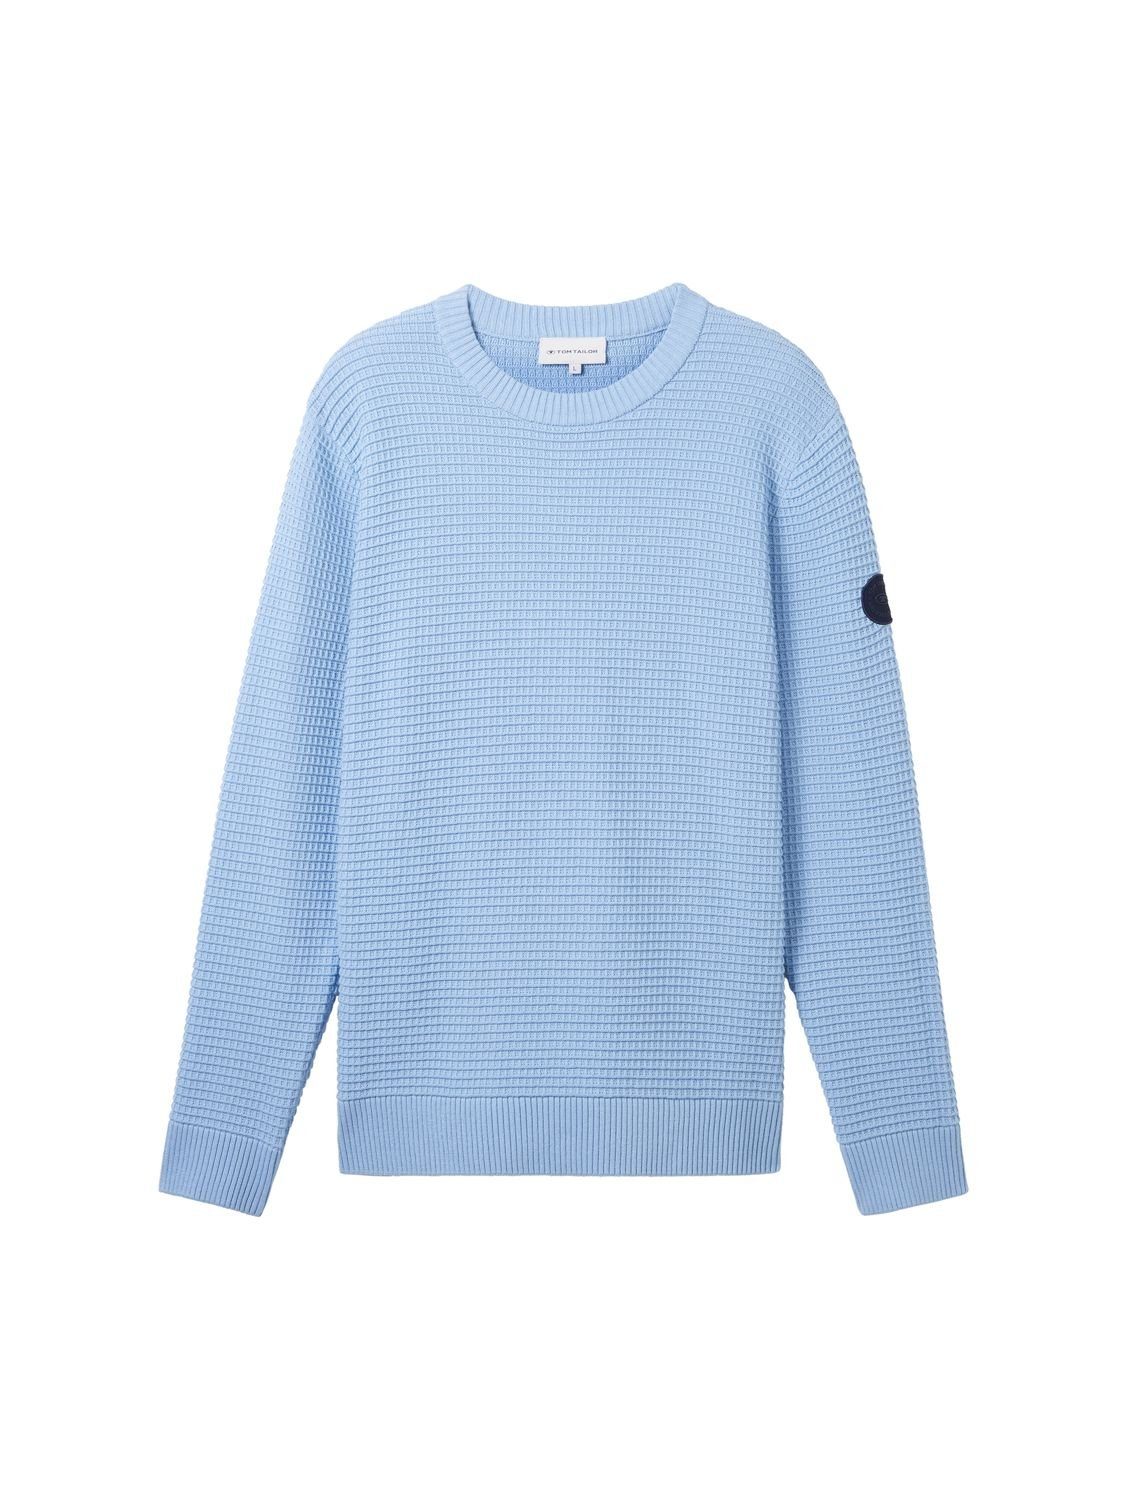 Strickpullover aus TAILOR Out TOM STRUCTURED 32245 KNIT CREWNECK Blue Washed Middle Baumwolle